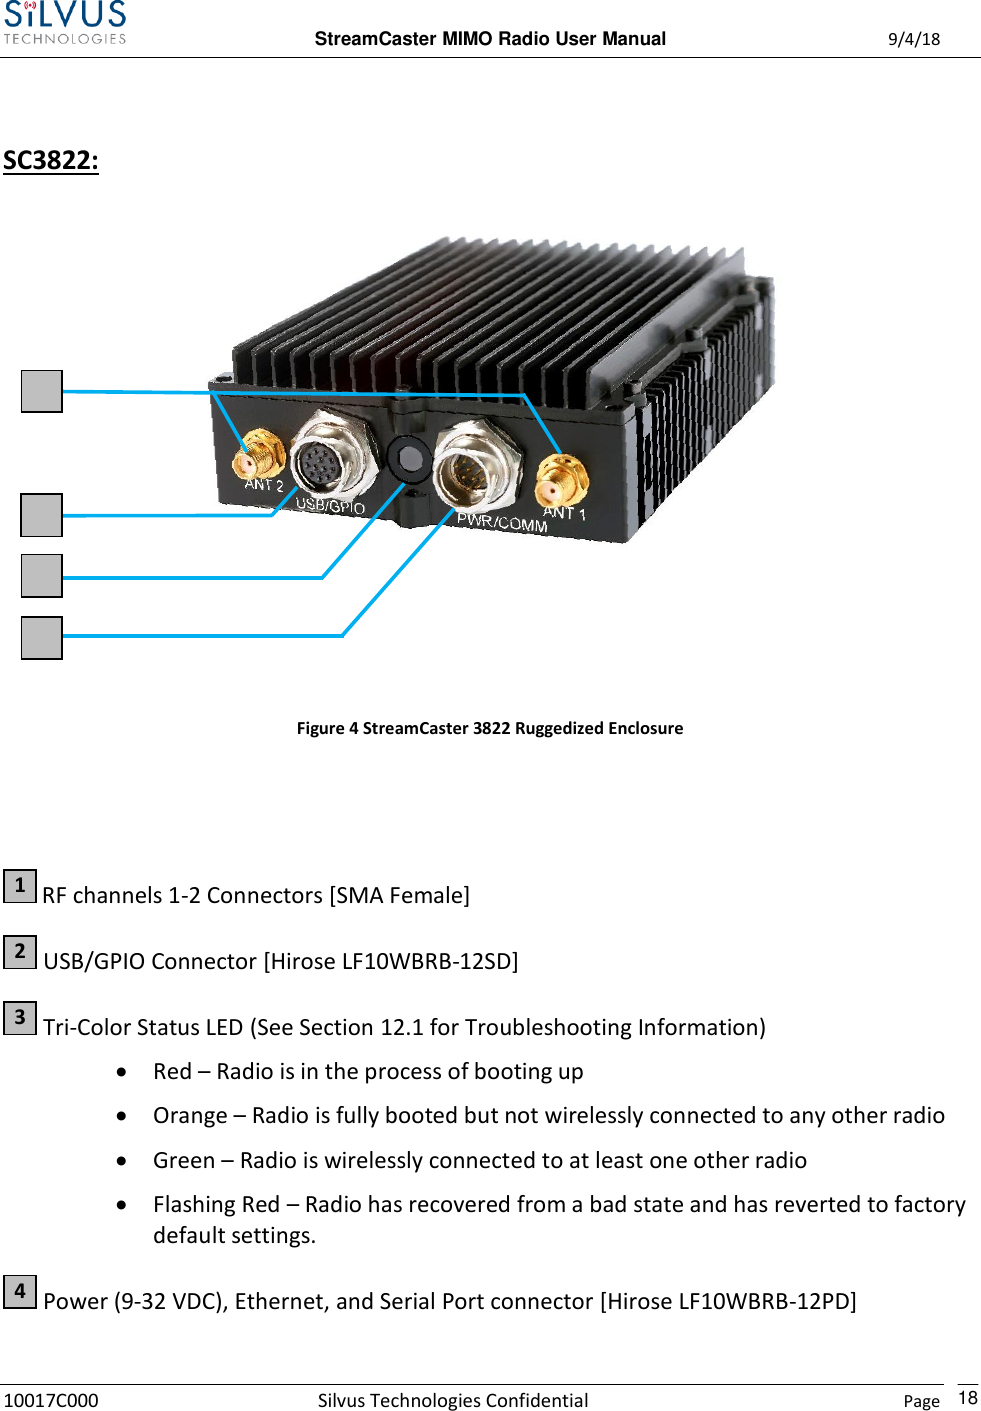  StreamCaster MIMO Radio User Manual  9/4/18 10017C000 Silvus Technologies Confidential    Page    18  SC3822:     Figure 4 StreamCaster 3822 Ruggedized Enclosure    RF channels 1-2 Connectors [SMA Female]  USB/GPIO Connector [Hirose LF10WBRB-12SD]  Tri-Color Status LED (See Section 12.1 for Troubleshooting Information)  Red – Radio is in the process of booting up  Orange – Radio is fully booted but not wirelessly connected to any other radio  Green – Radio is wirelessly connected to at least one other radio  Flashing Red – Radio has recovered from a bad state and has reverted to factory default settings.  Power (9-32 VDC), Ethernet, and Serial Port connector [Hirose LF10WBRB-12PD] 4 3 2 1 